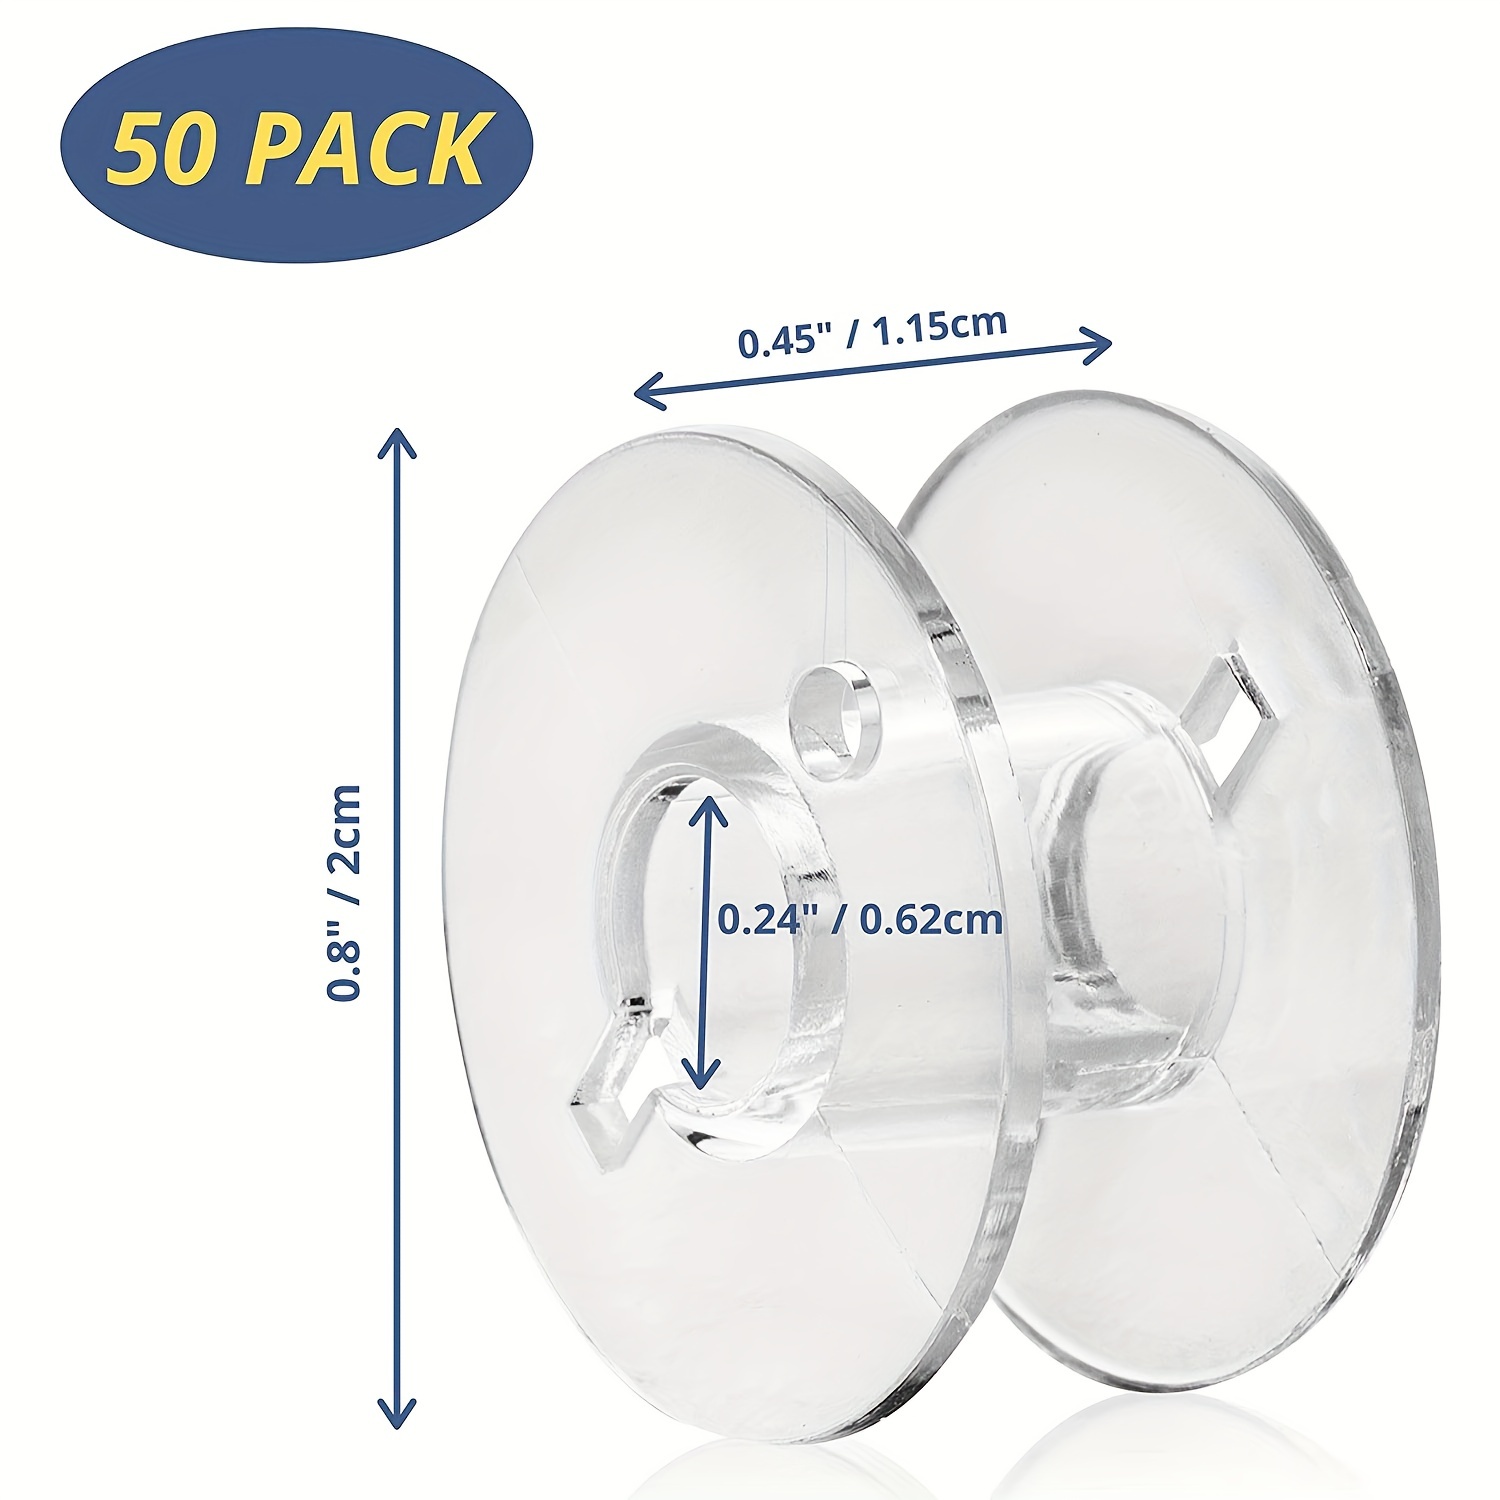 Bobbin Plastic 15k Front Loading fits Top Loading Pack of 3. Buy sewing  machine accessories